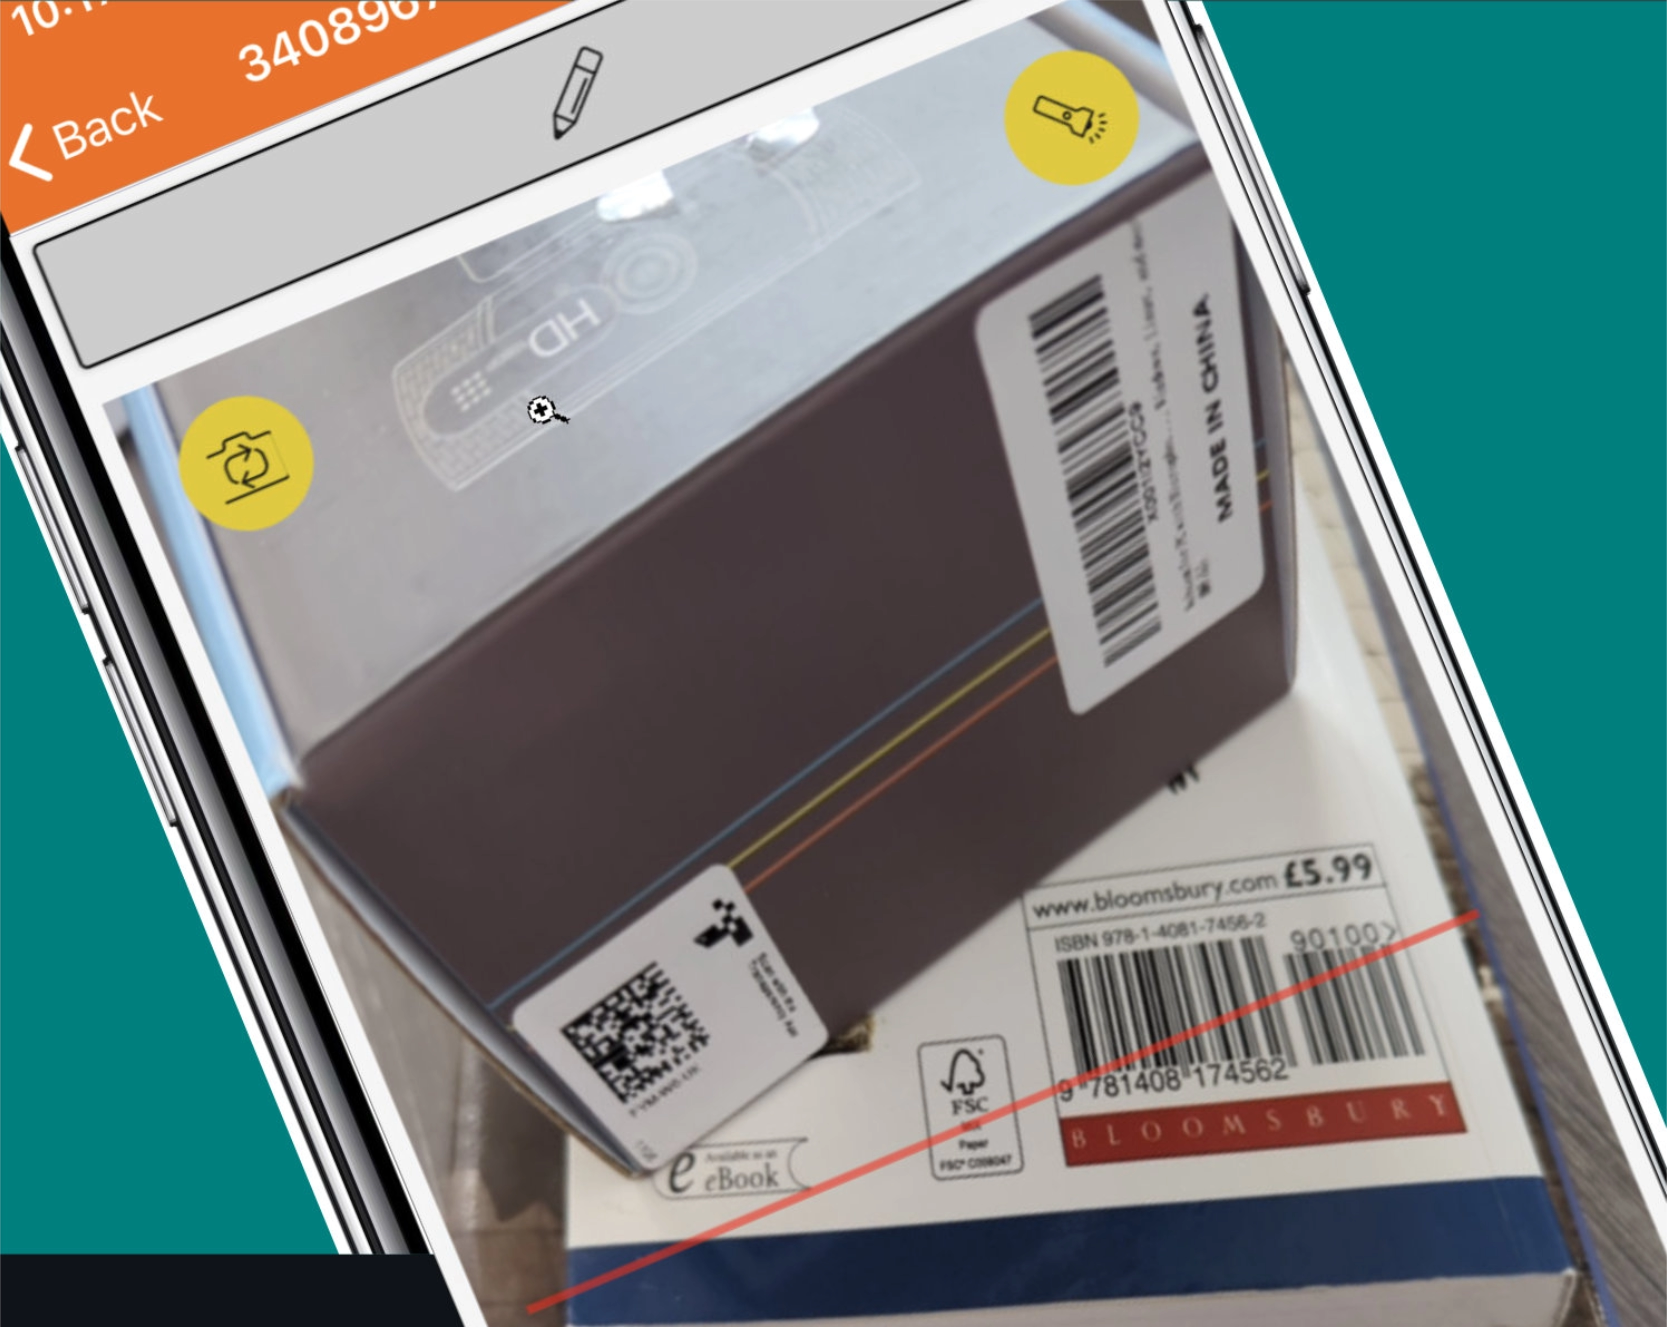 Scan barcodes or QR codes.